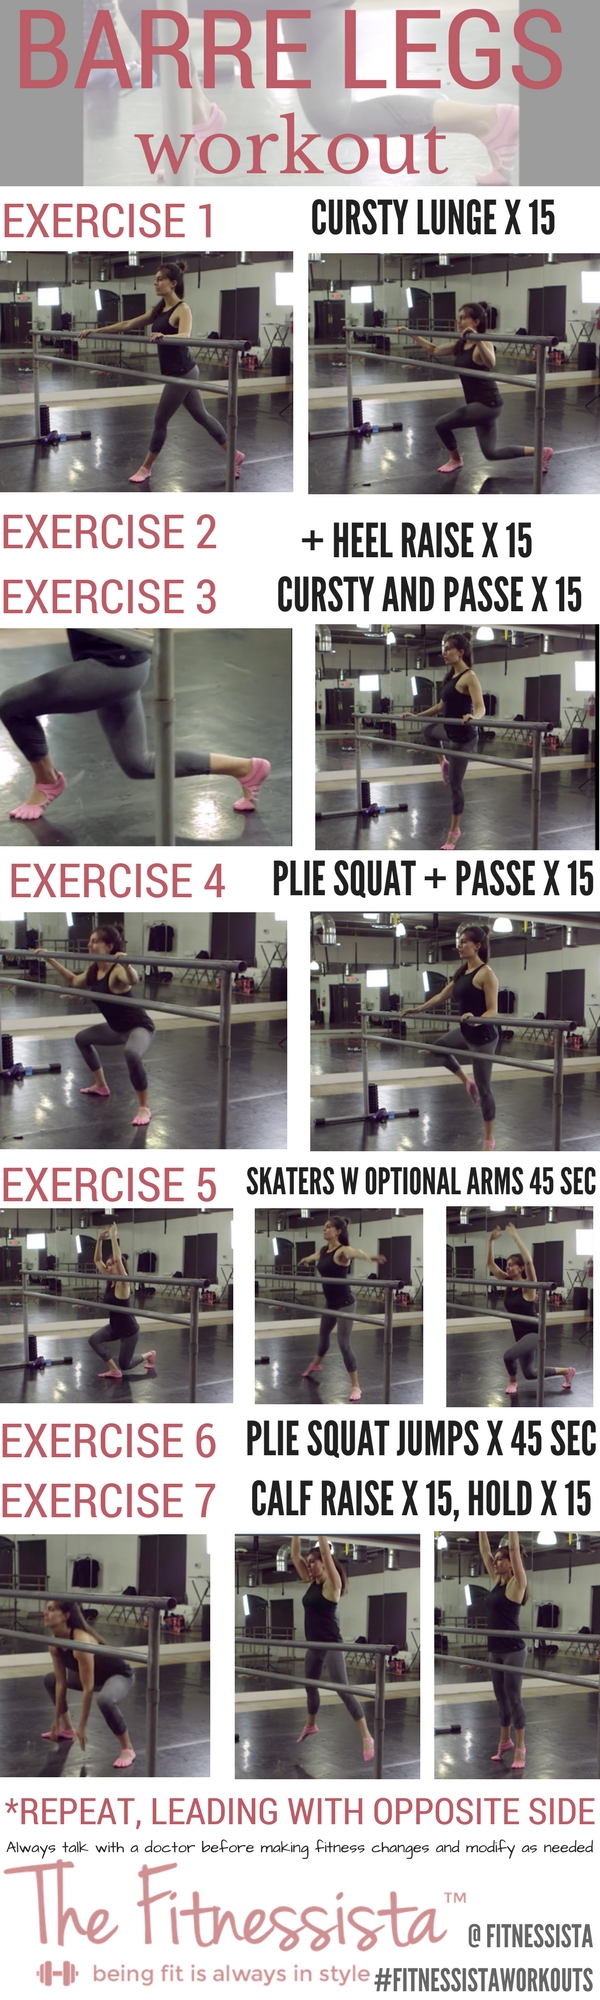 ULTIMATE THIGH SLIMMING BARRE WORKOUT 💕 